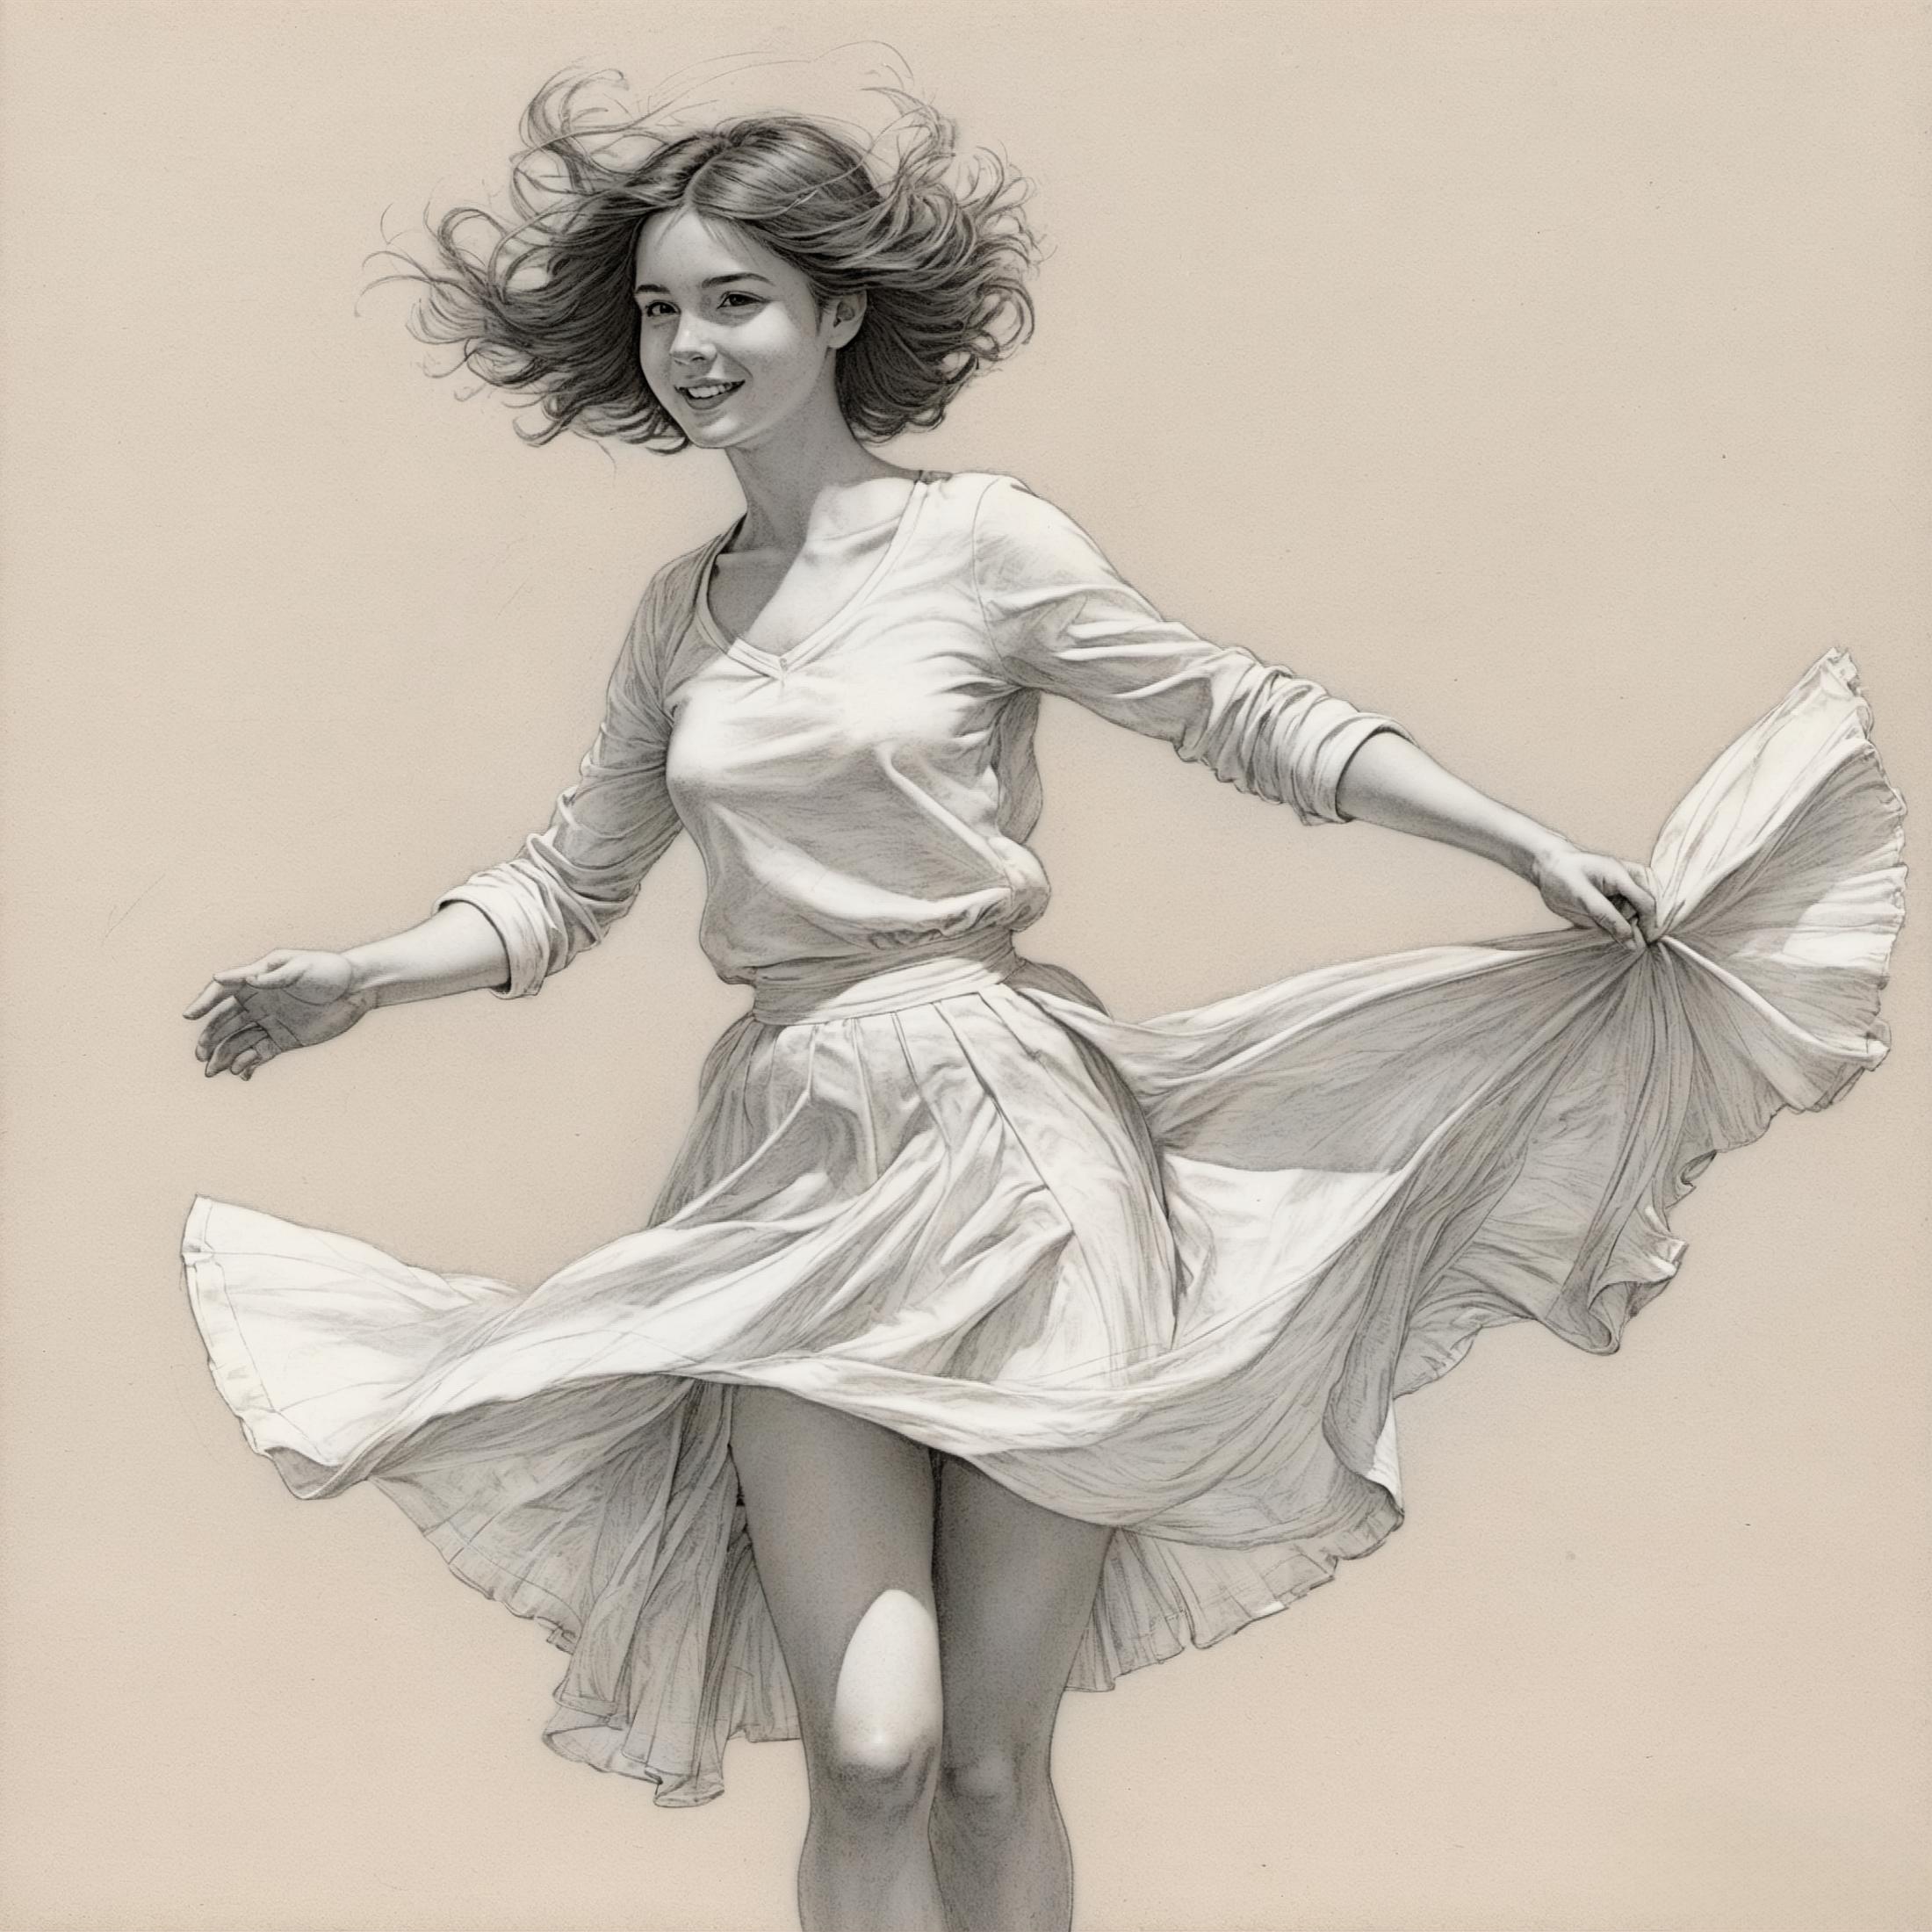 A woman with a white dress blowing her hair in the wind.